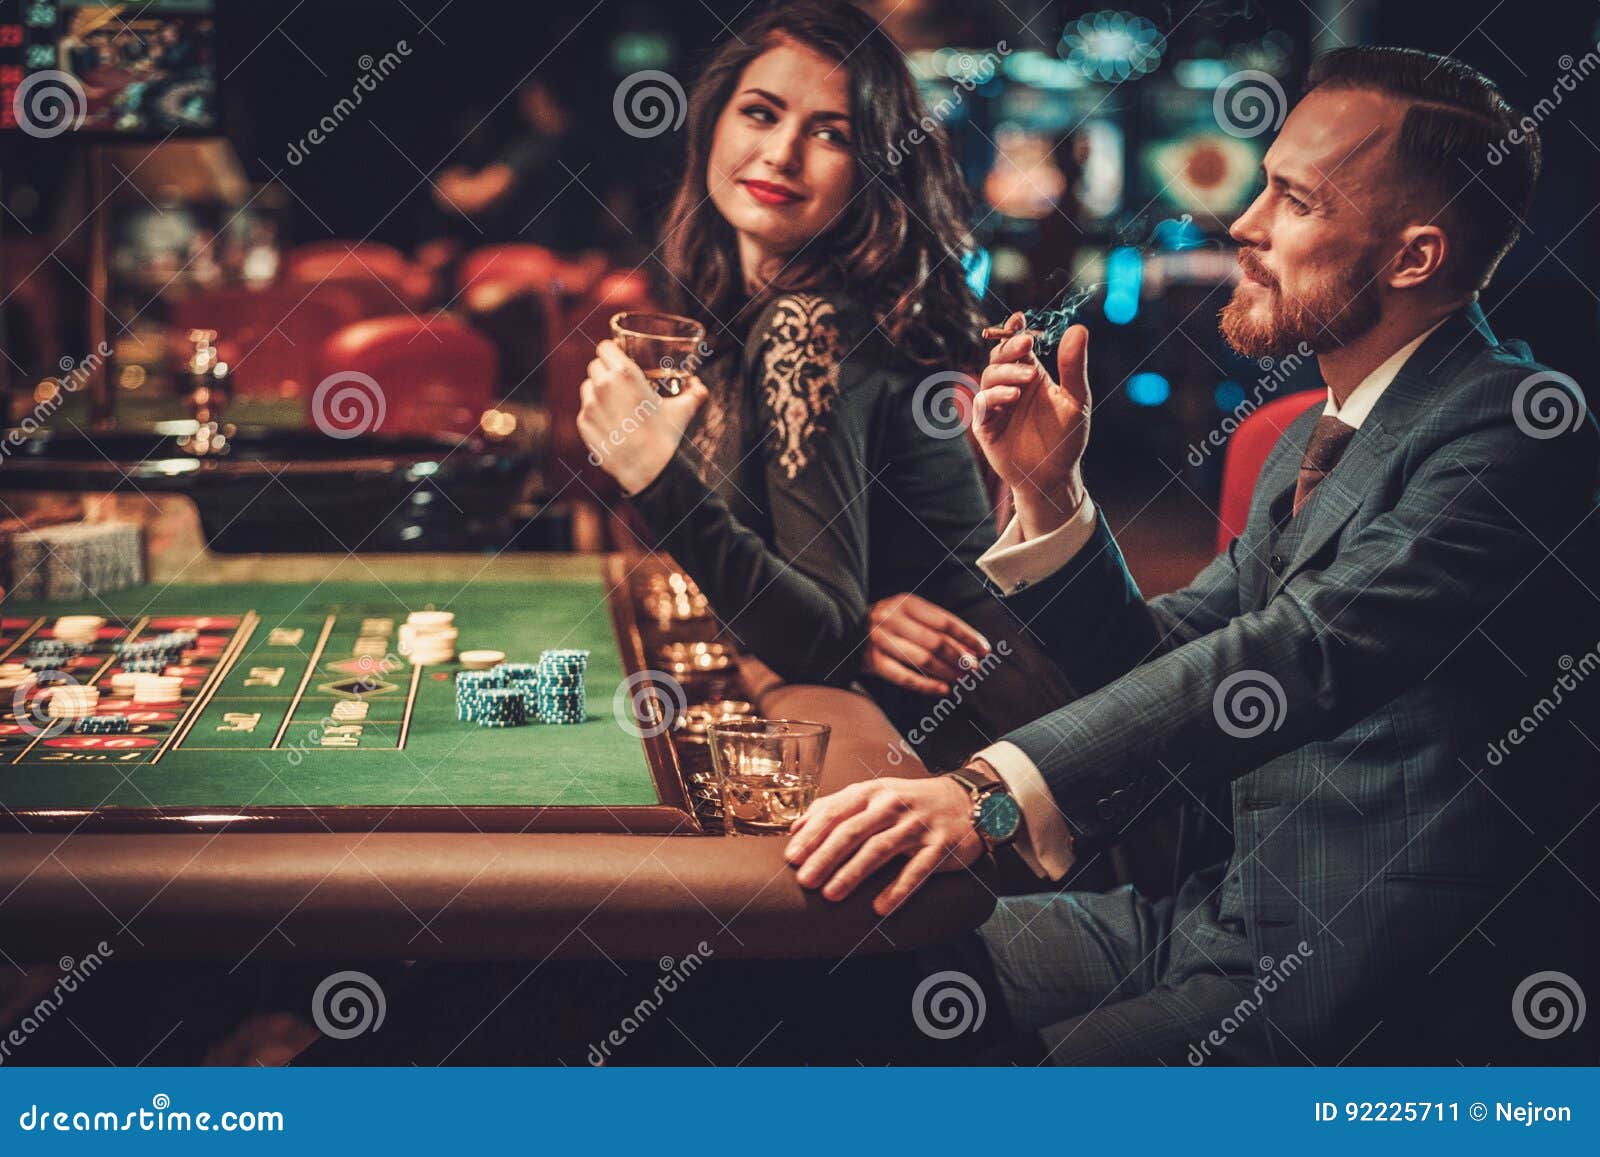 Upper Class Couple Gambling in a Casino Stock Image - Image of gaming,  couple: 92225711